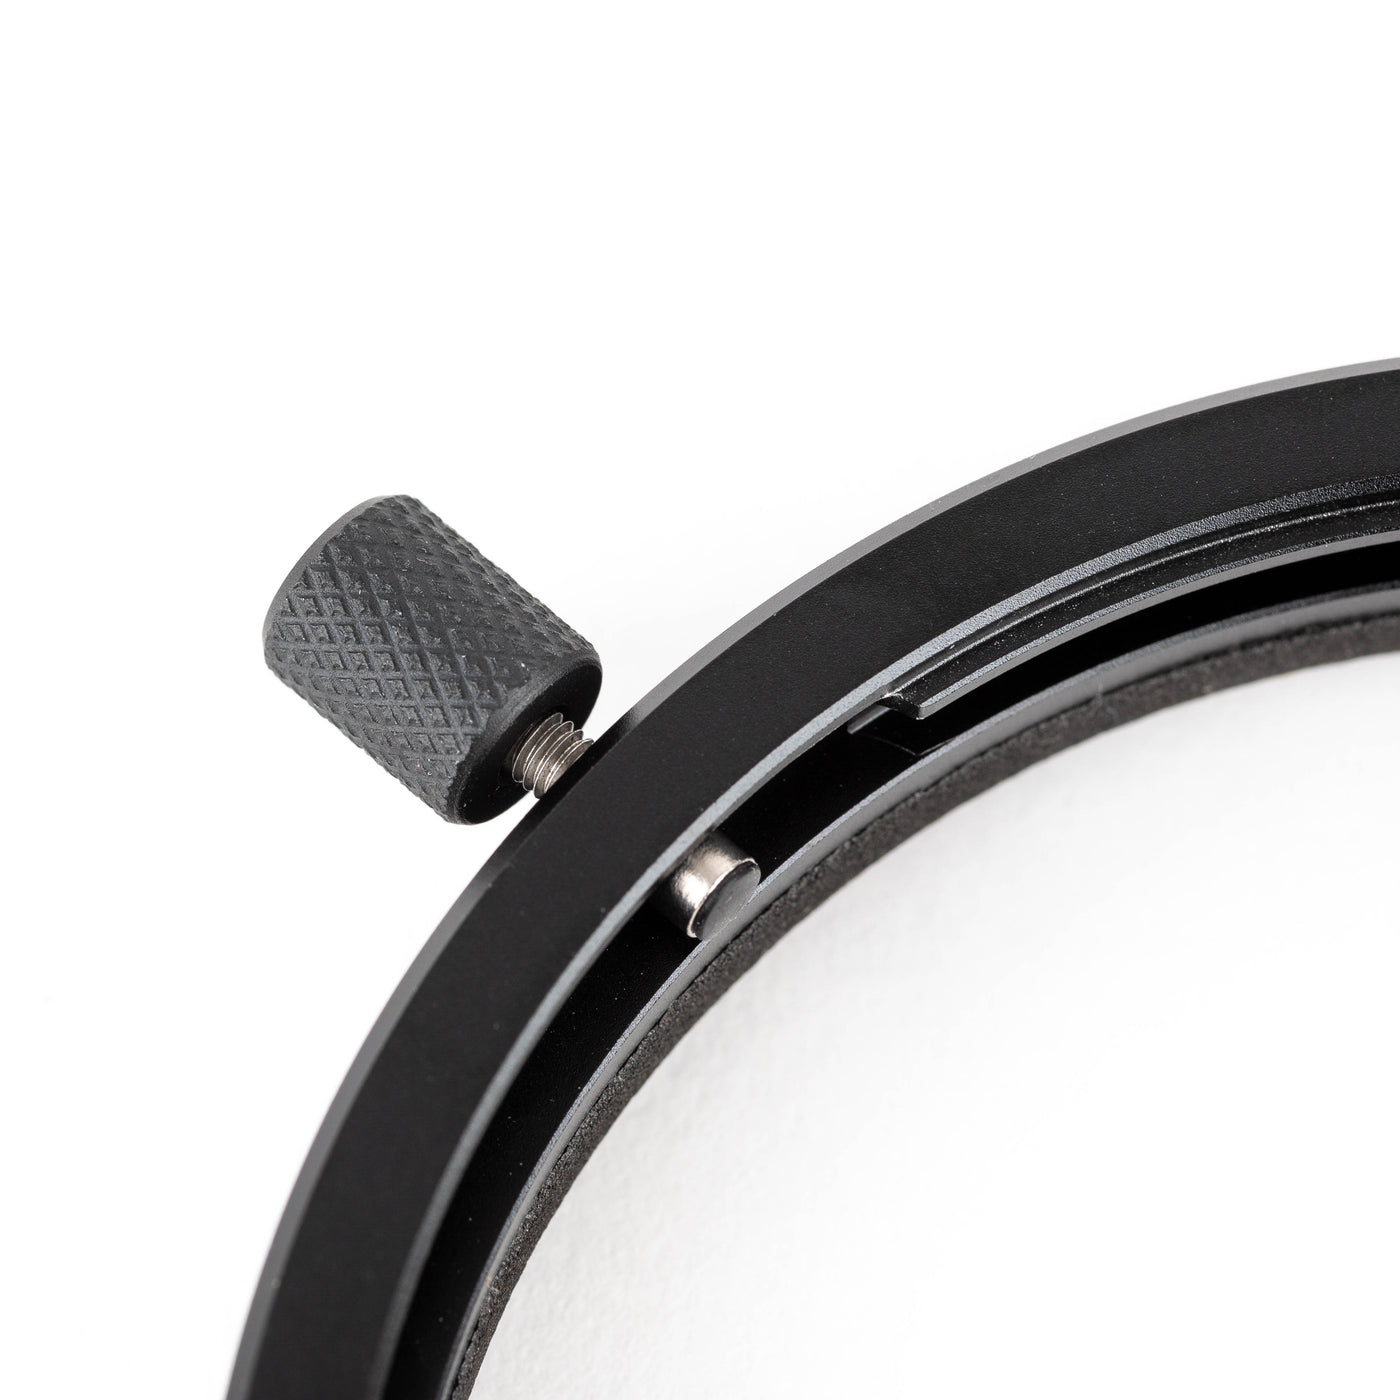 NX Series Adapter Ring for Nikkor Z 14-24mm F2.8 S